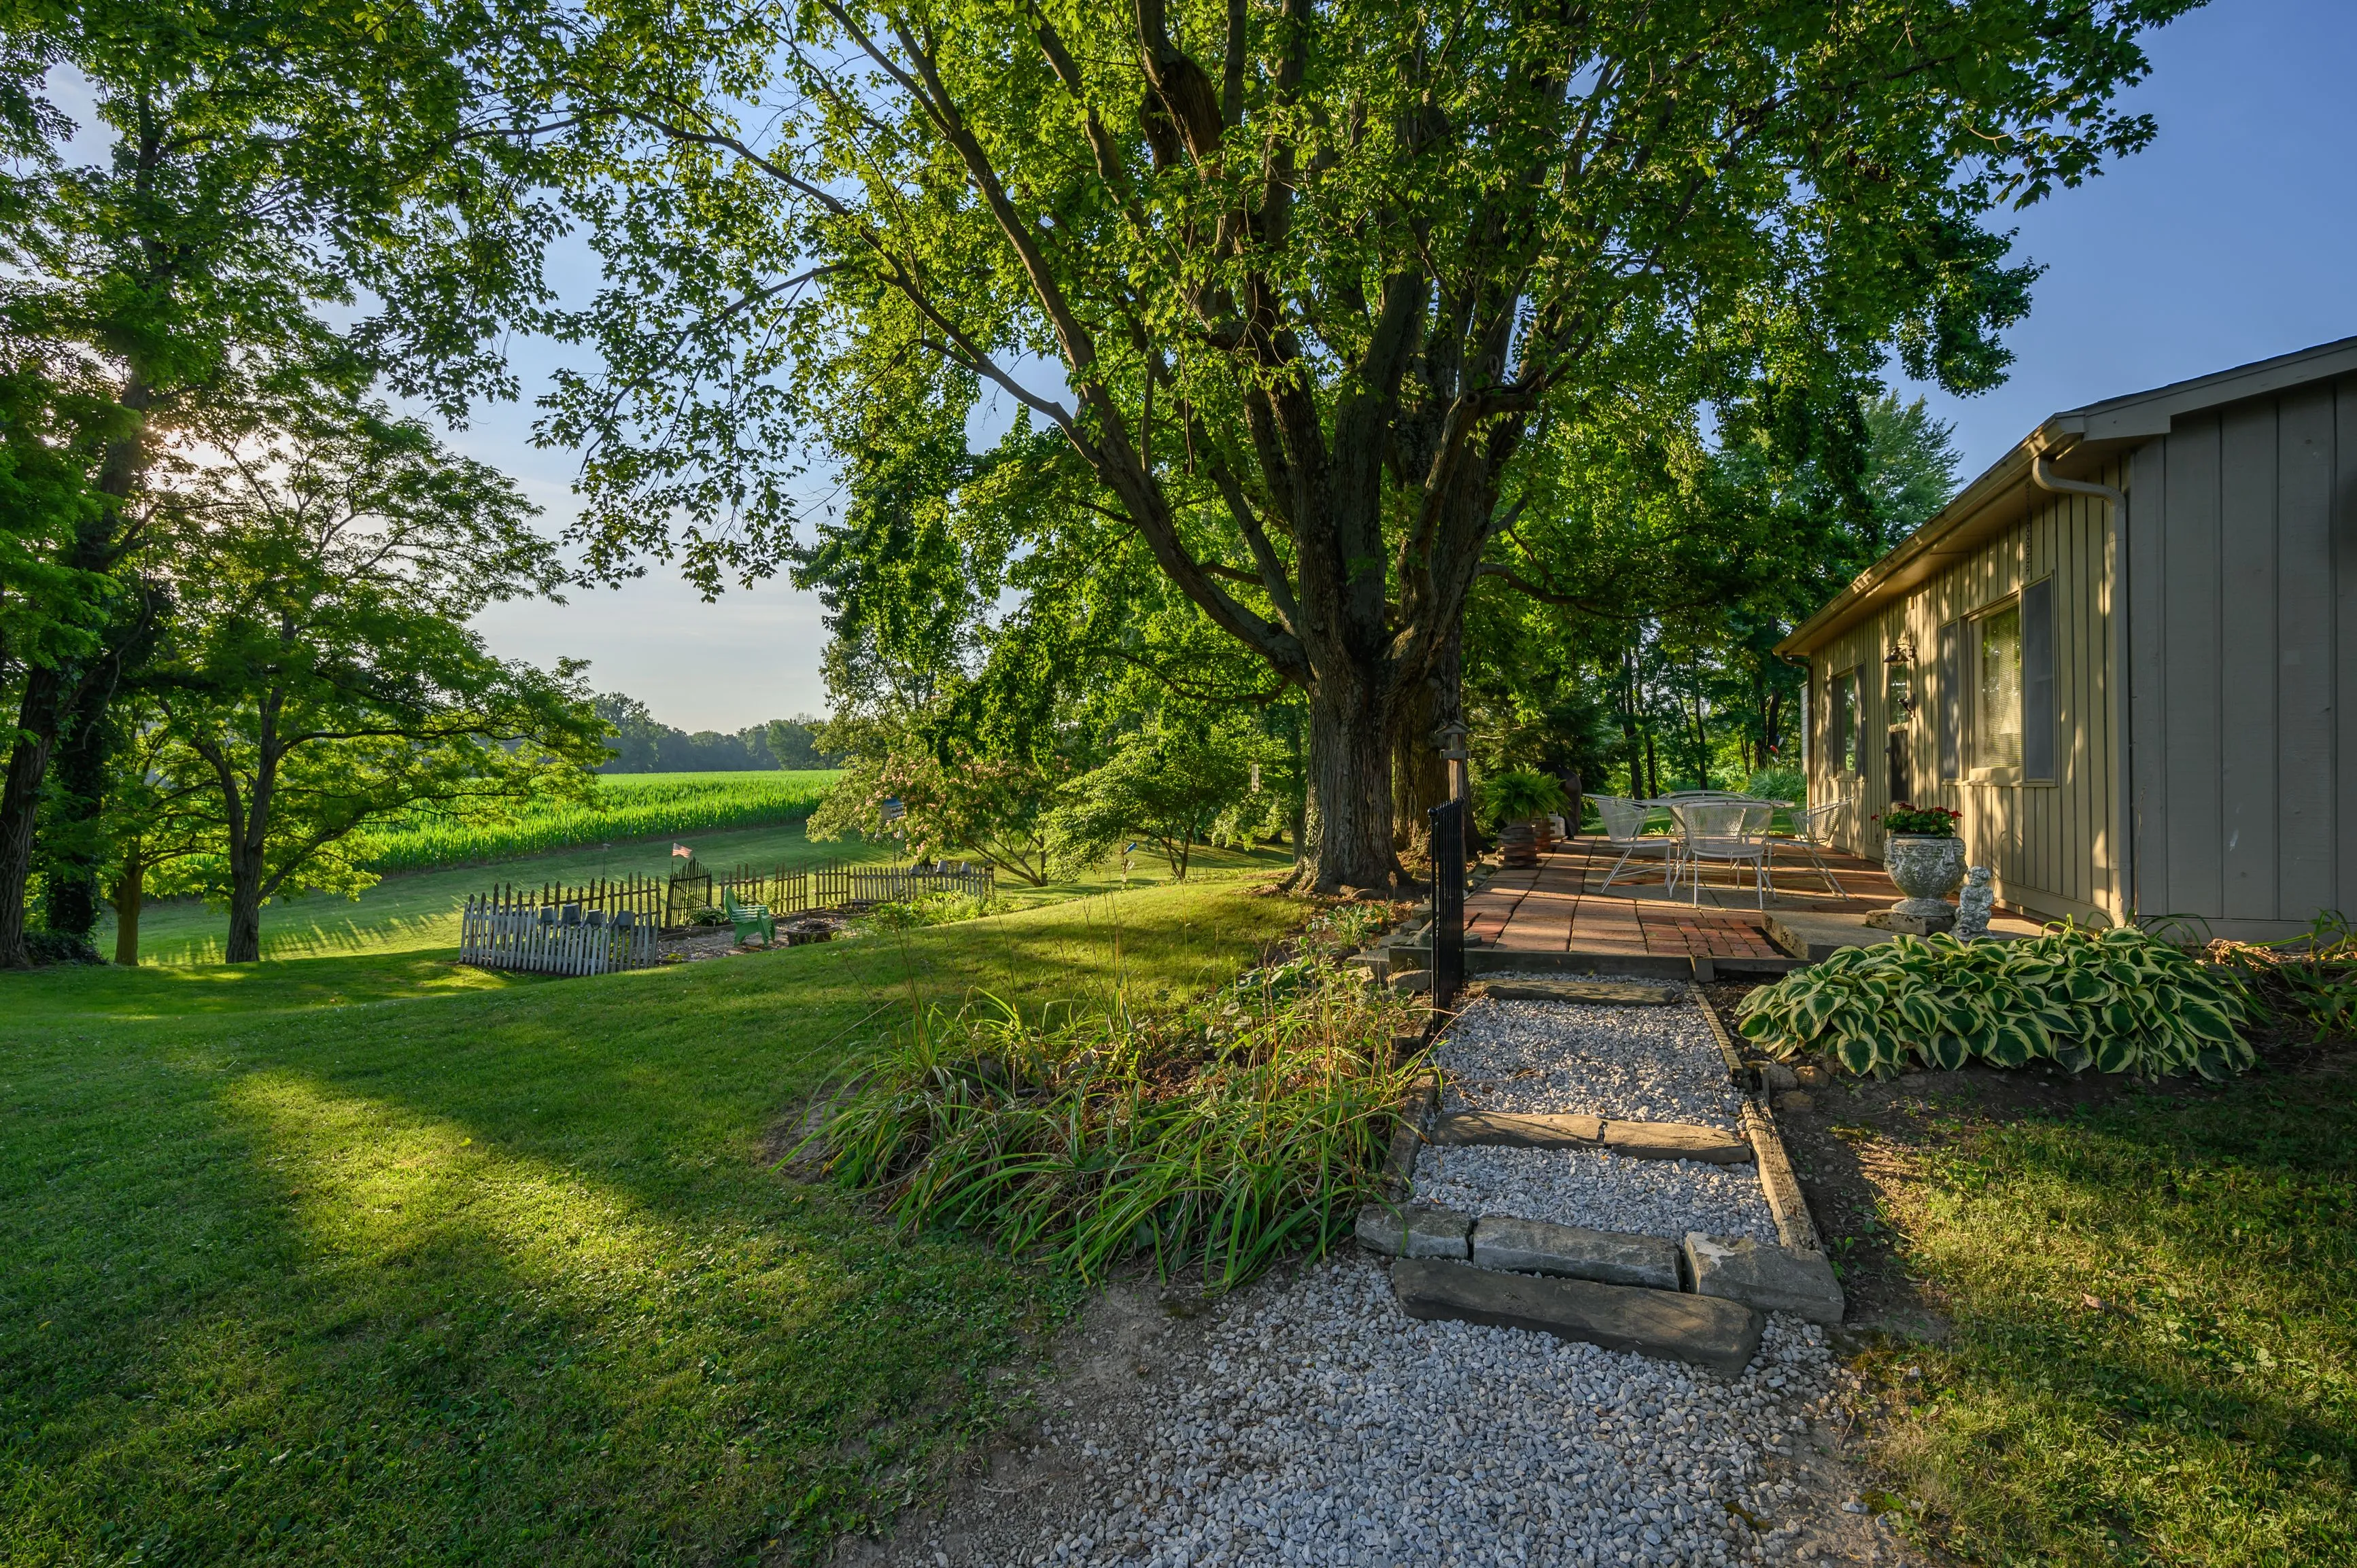 A serene backyard with a large tree, gravel path, patio furniture, and a view of green fields in the background.